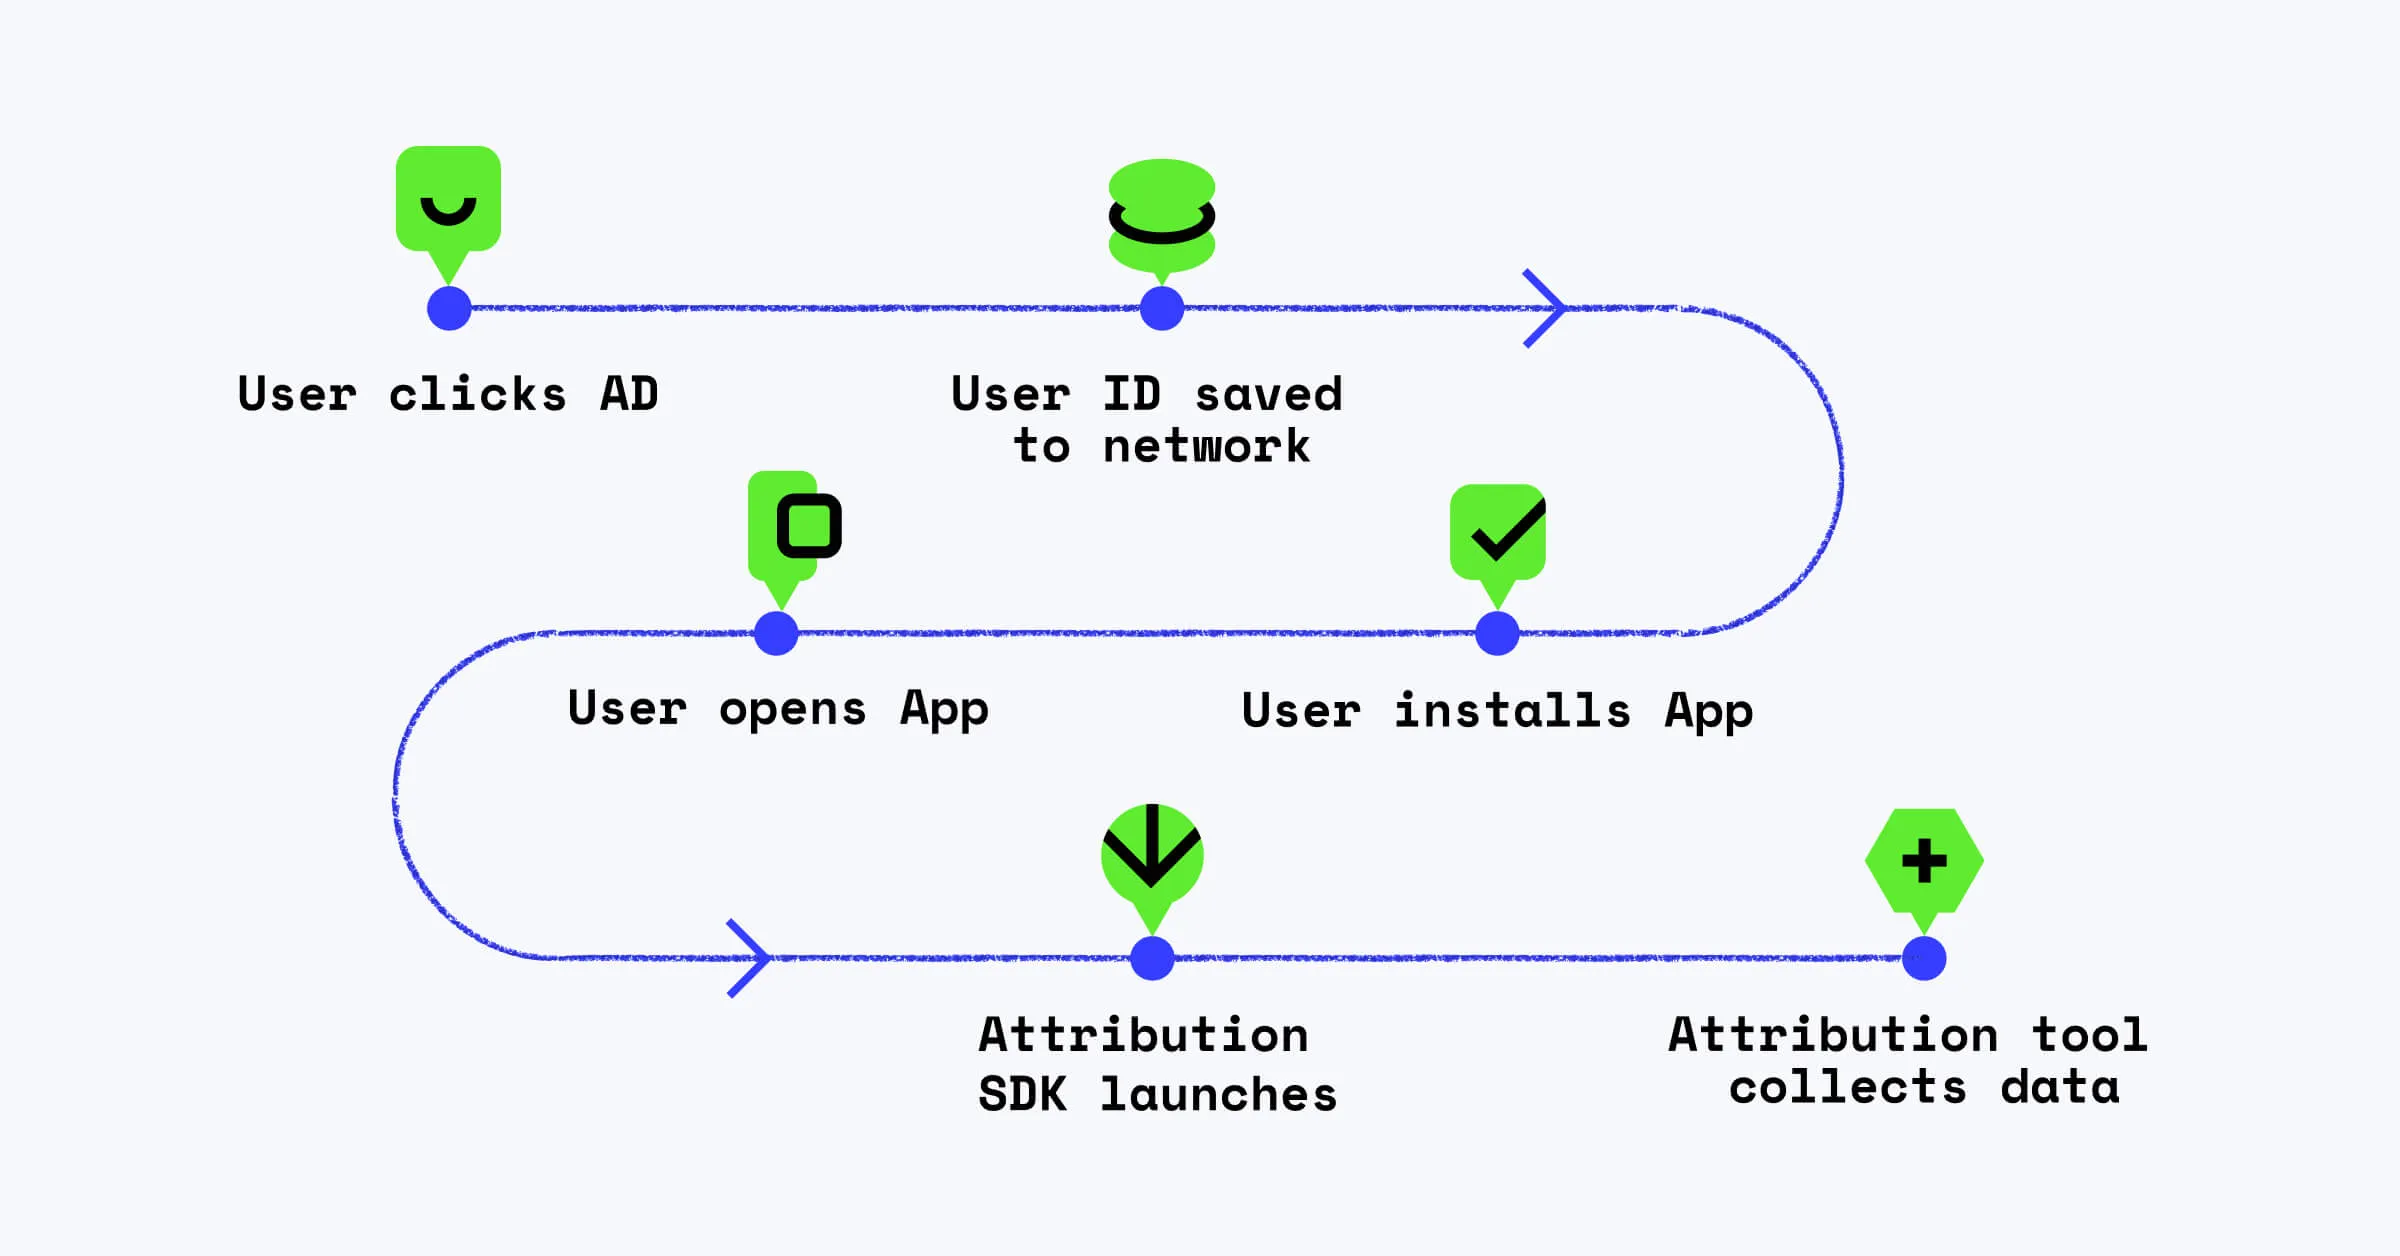 Mobile attribution in Android 12